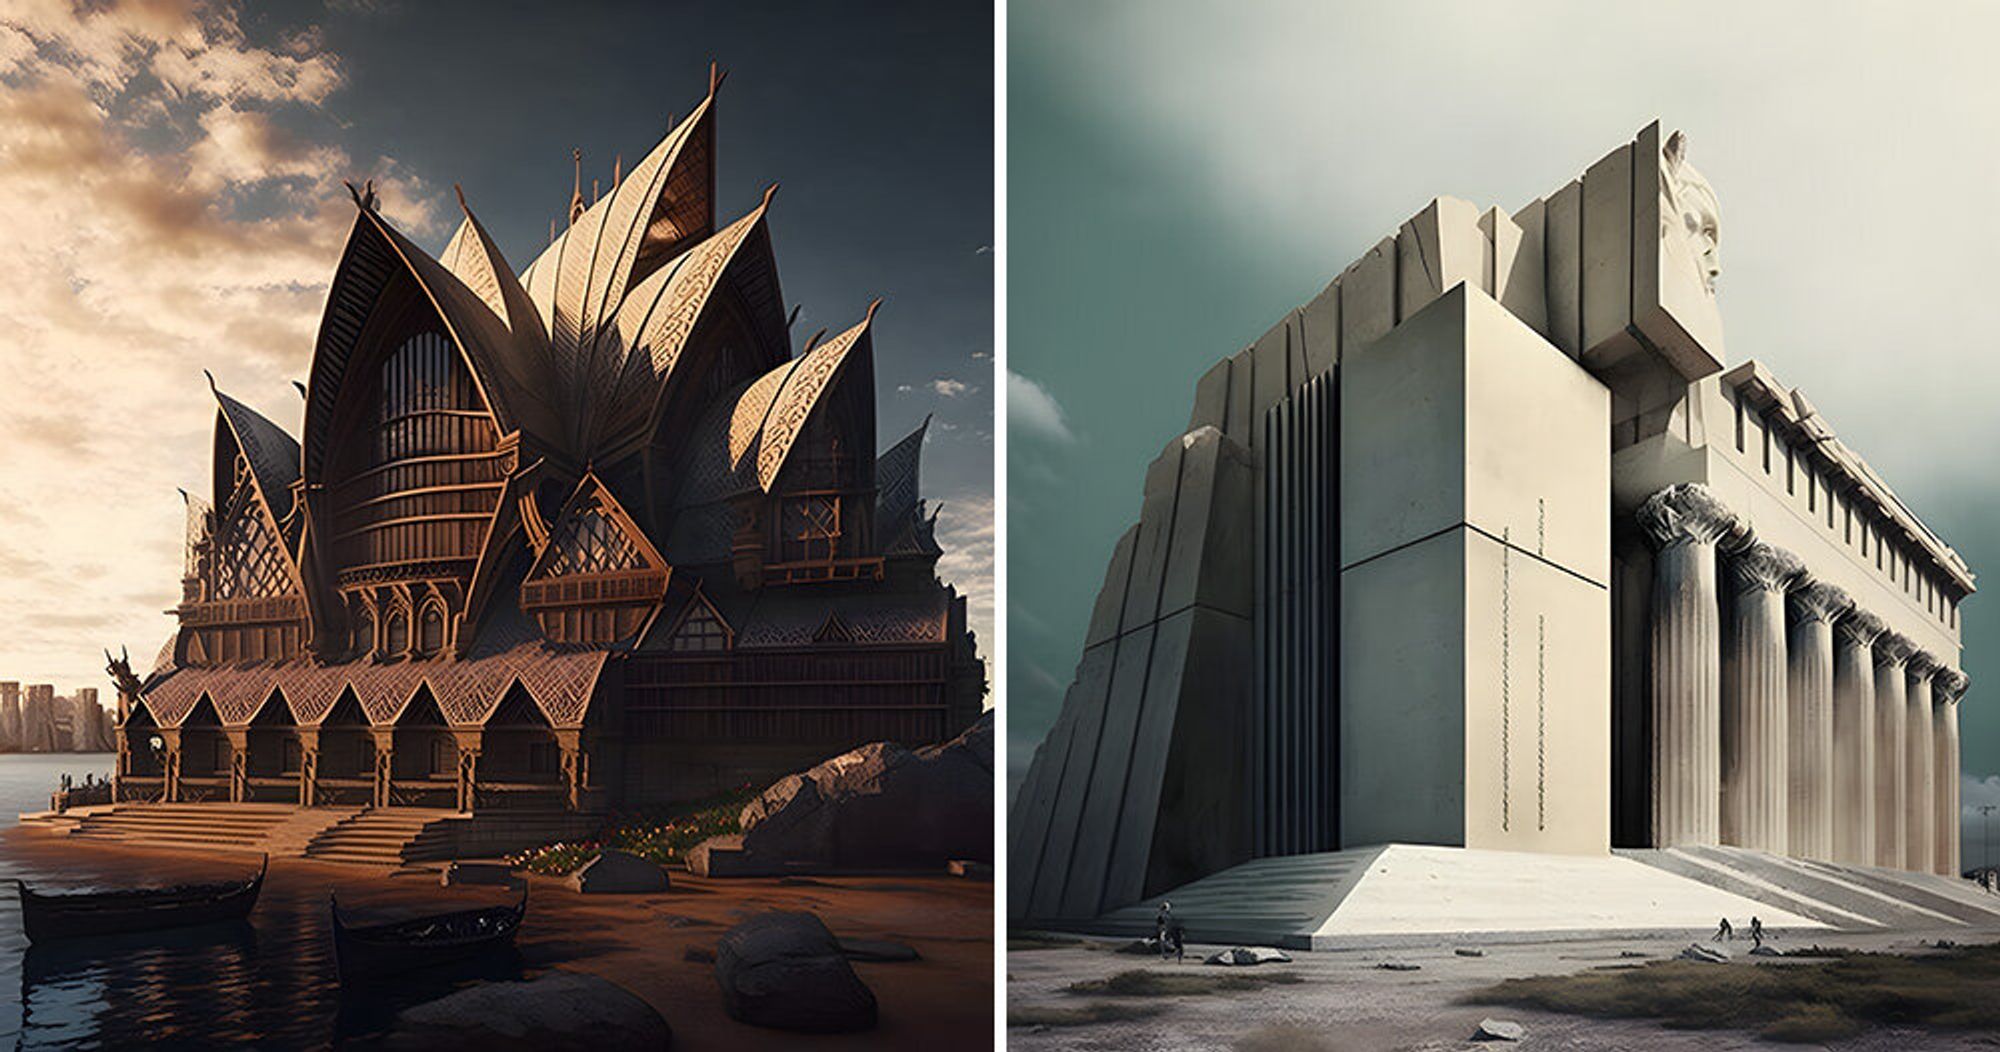 alternative histories: iconic architecture reimagined in different styles using AI